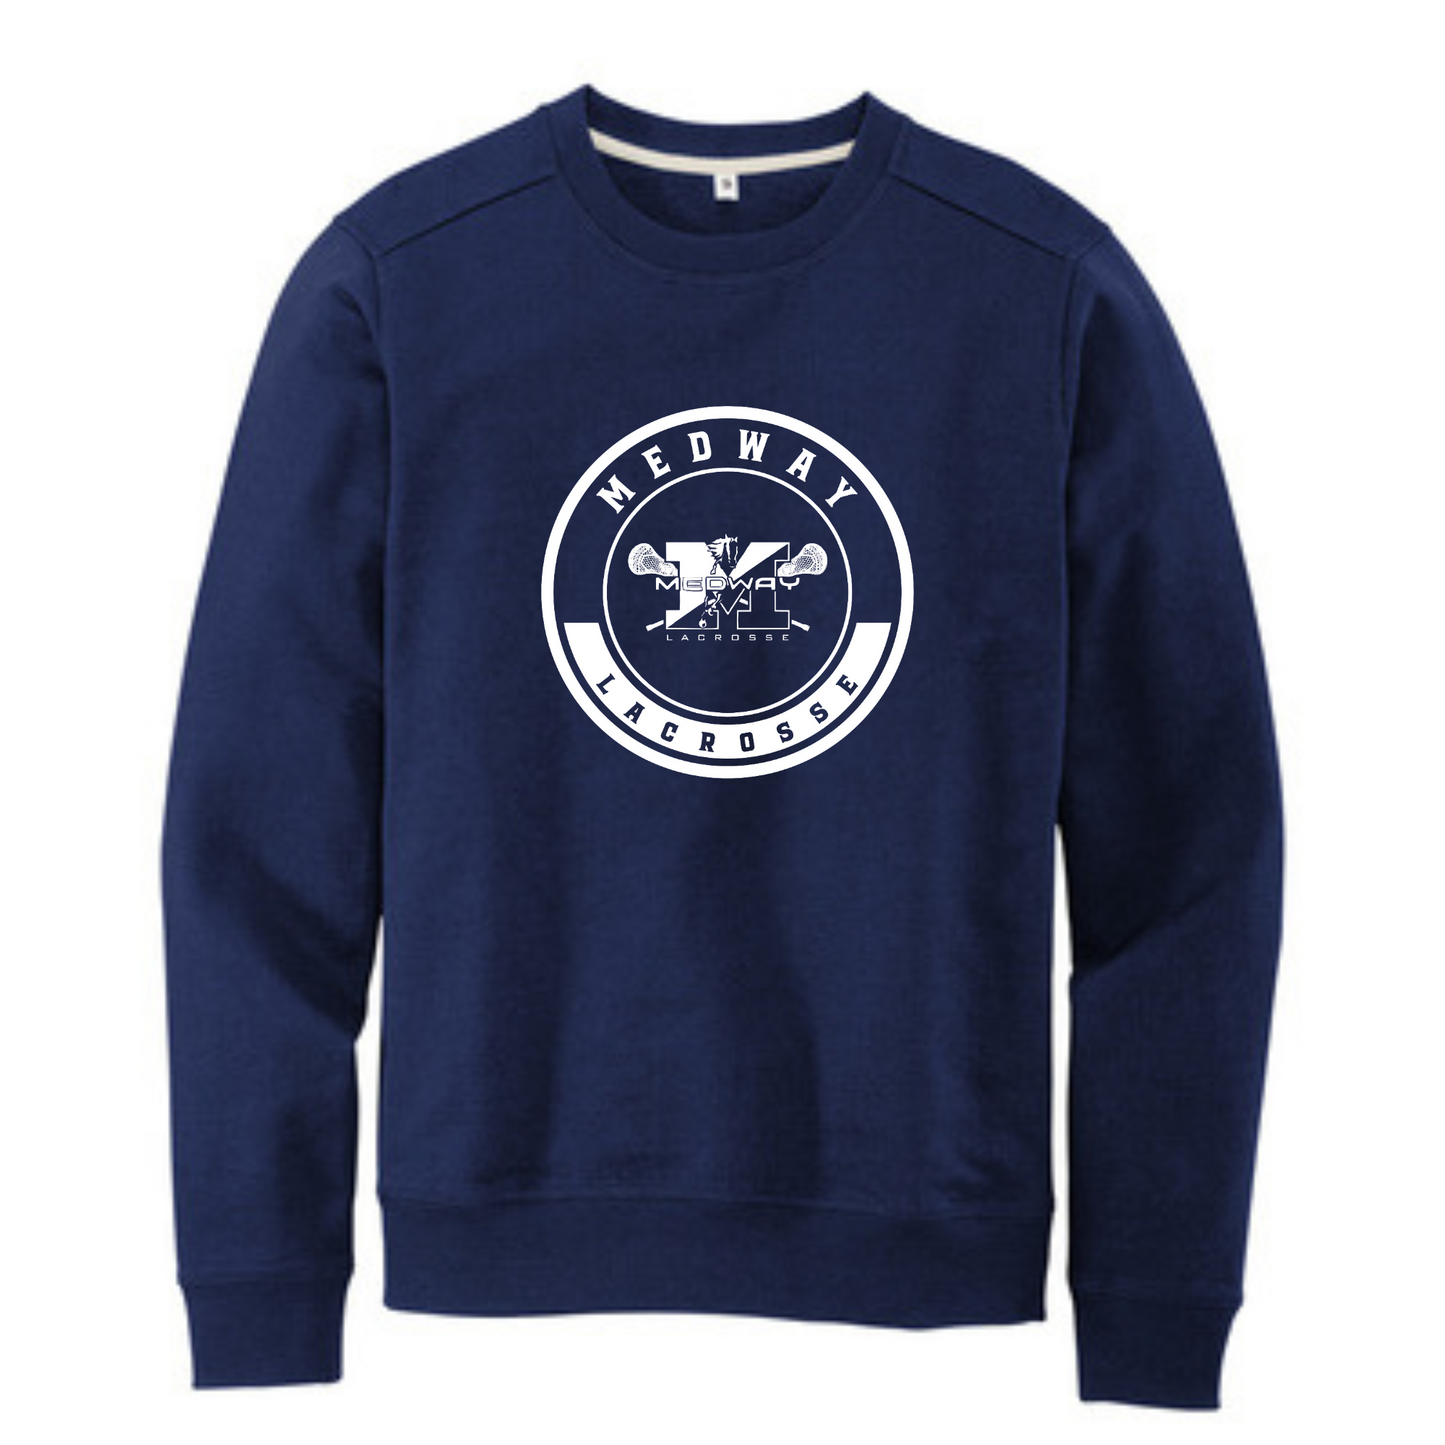 MEDWAY YOUTH LACROSSE CIRCLE LOGO ADULT CREW - NAVY